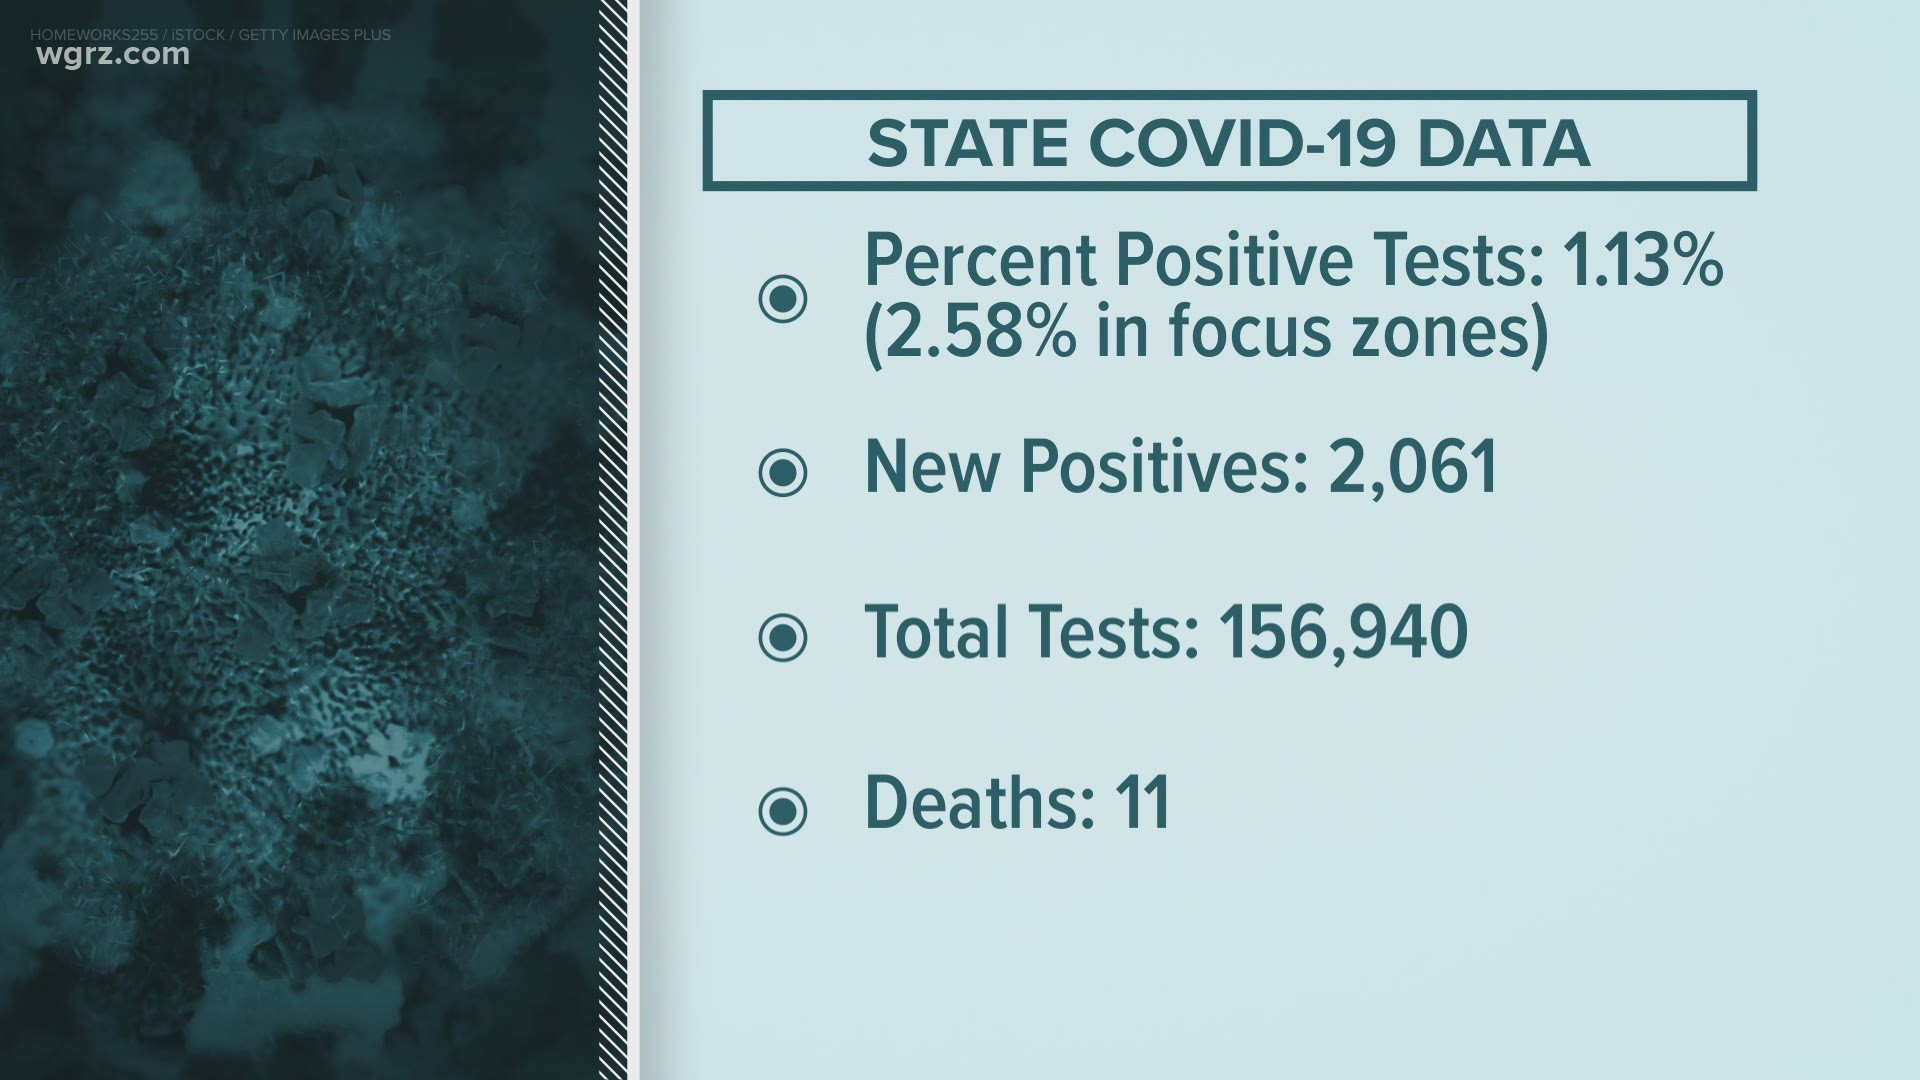 New Positives were just over 2-thousand.
Total tests received by the state were nearly 157-thousand.